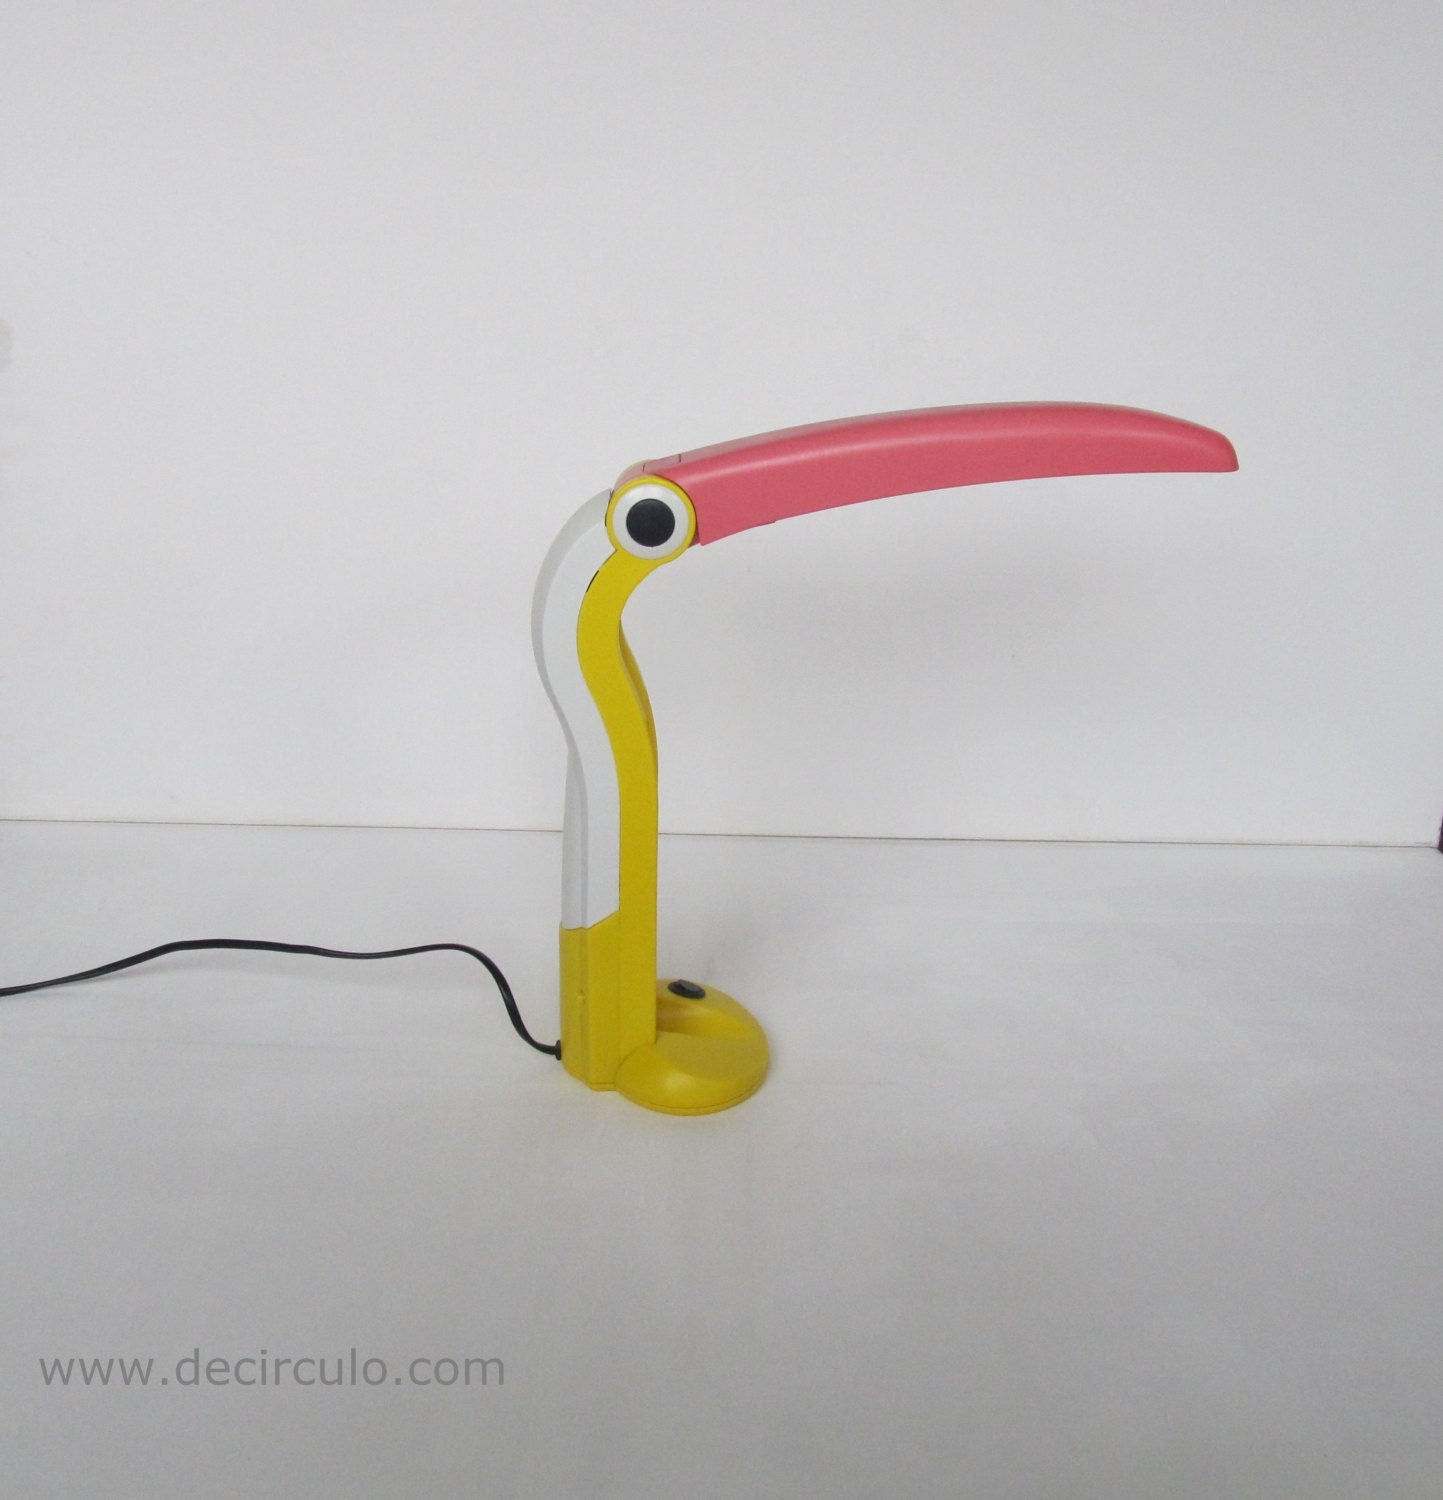 Retro toucan pelican desk table Lamp, 1980's vintage great lighting for childrensroom bedroom or office workplace